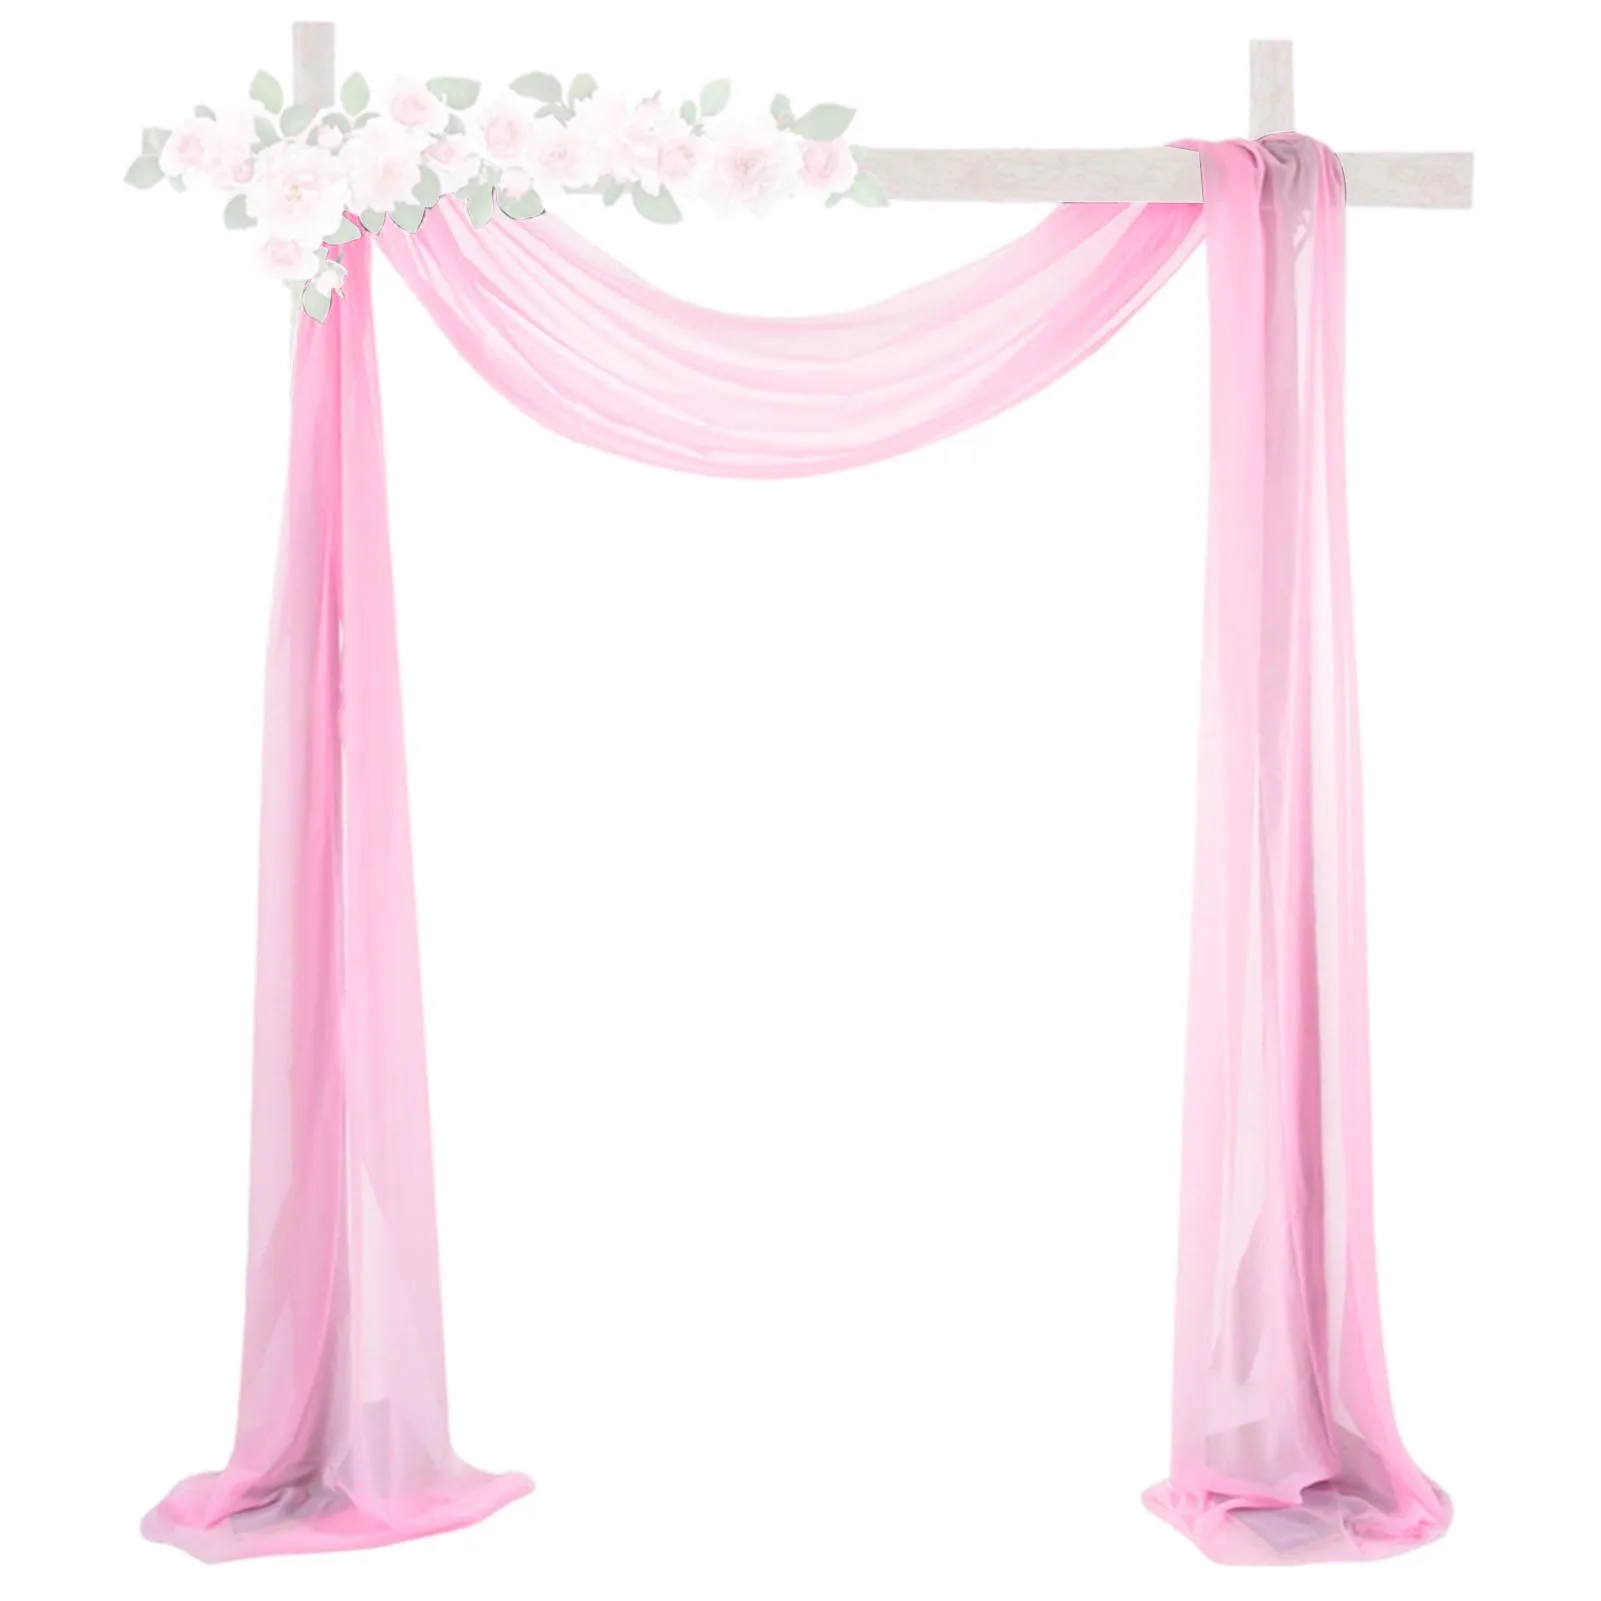 Wedding Arch Chiffon Drapes Panel Outdoor Ceremony Engagement Party Backdrop Curtain Photography Background Expedient | Дом и сад